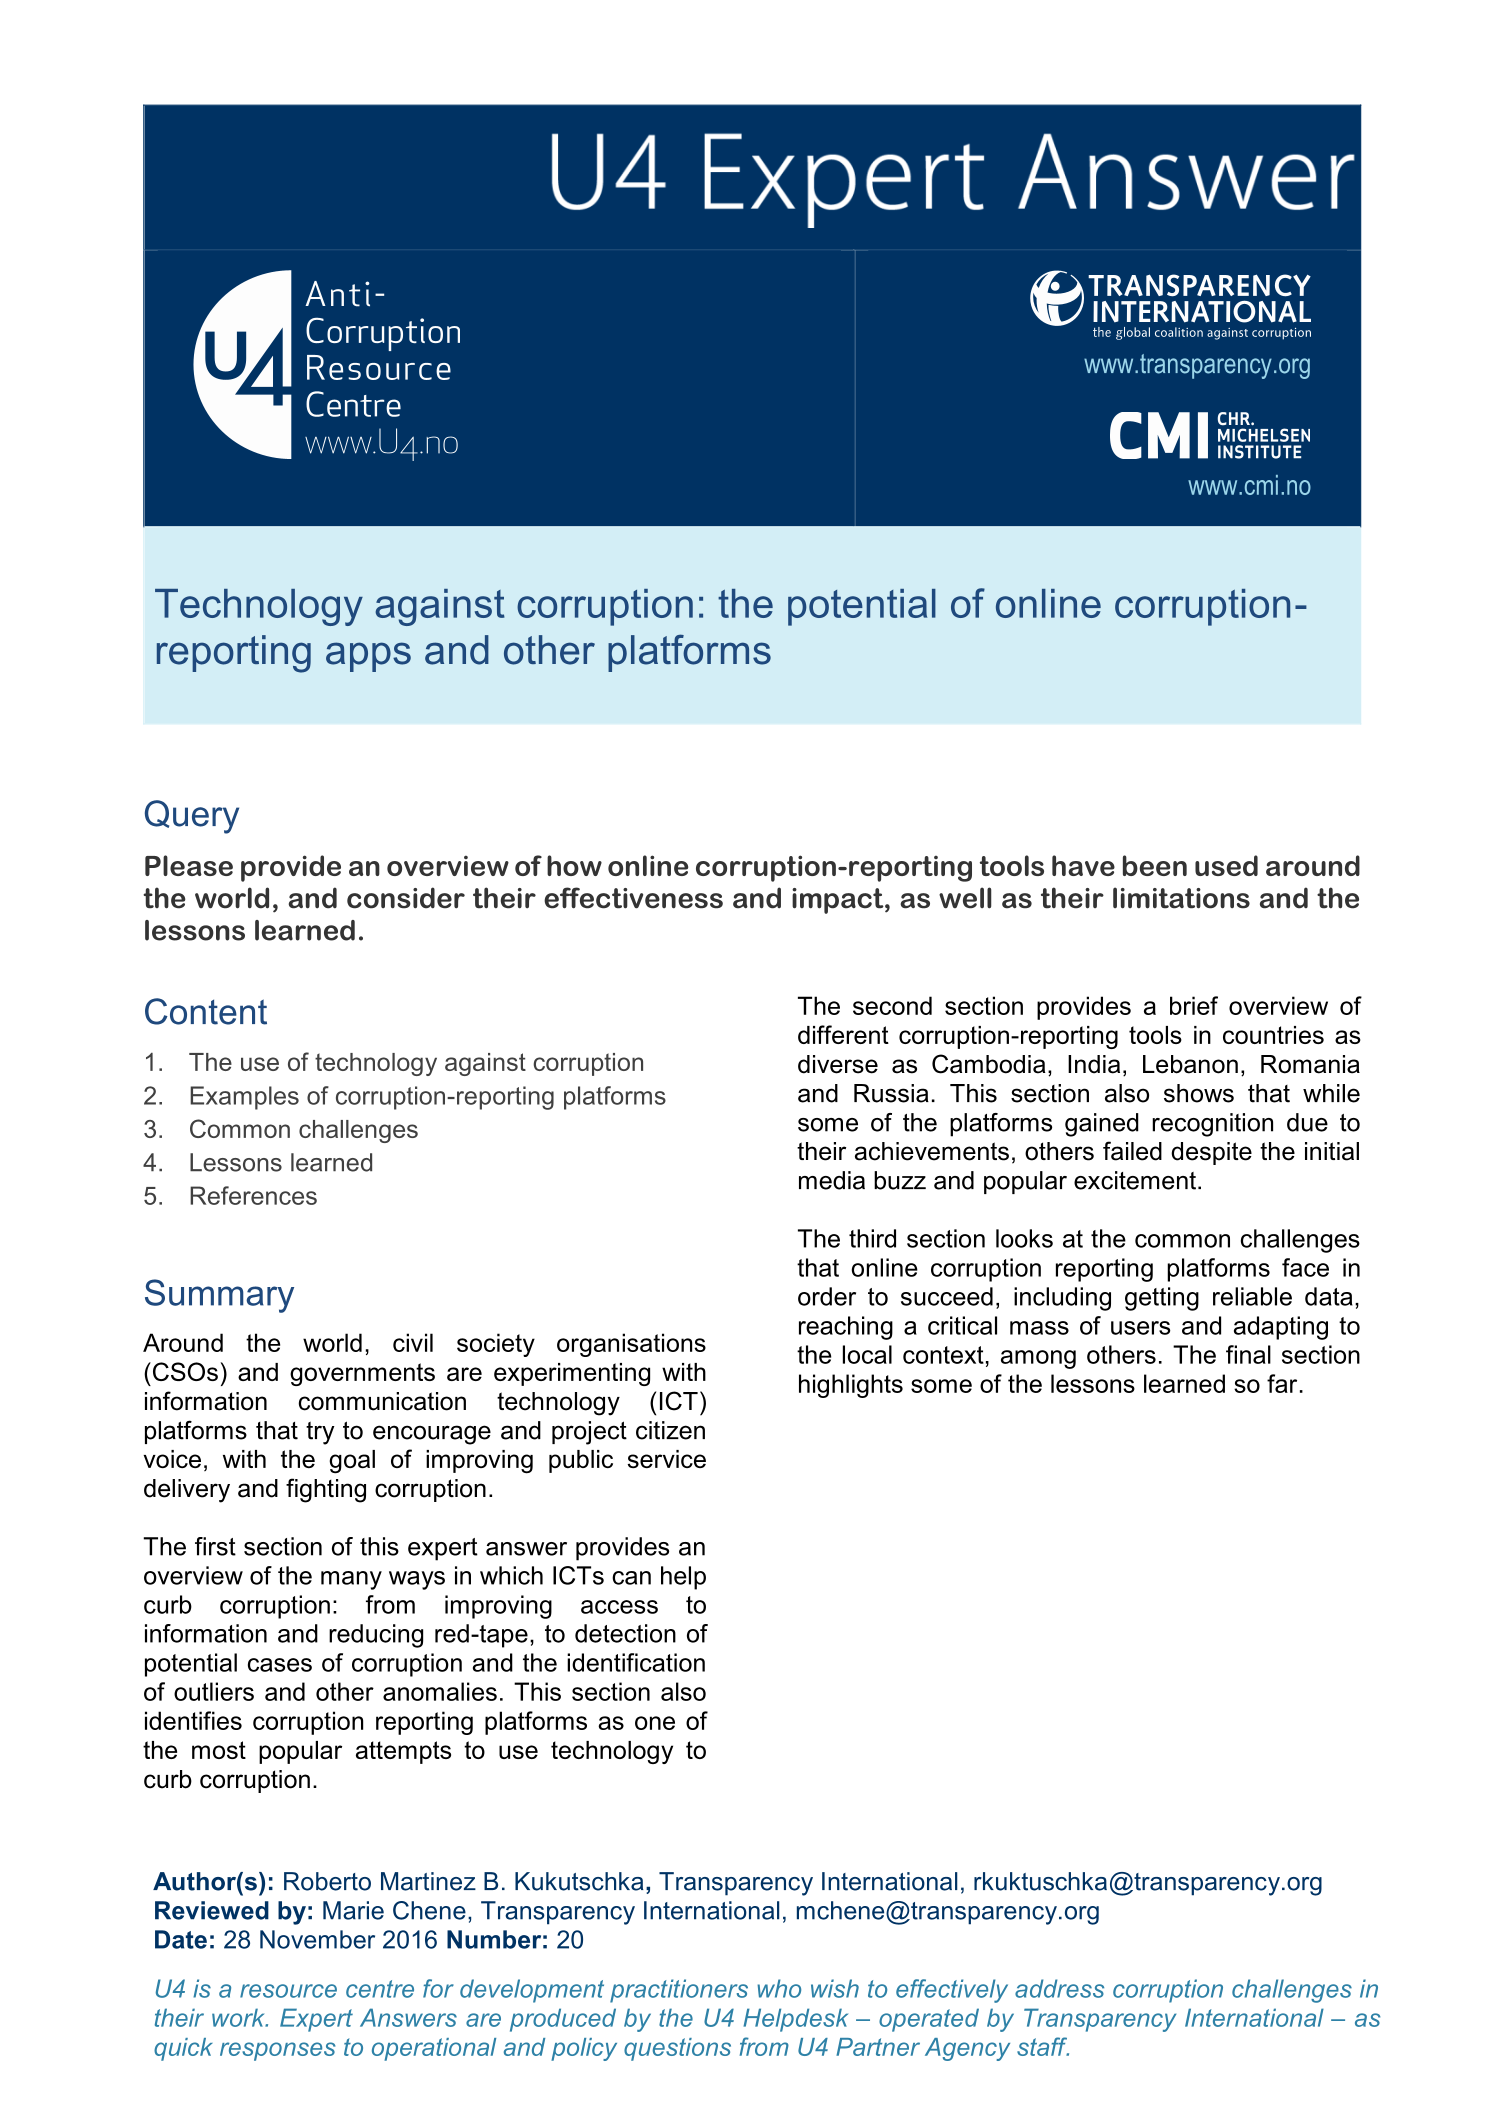 Technology against corruption: the potential of online corruption-reporting apps and other platforms